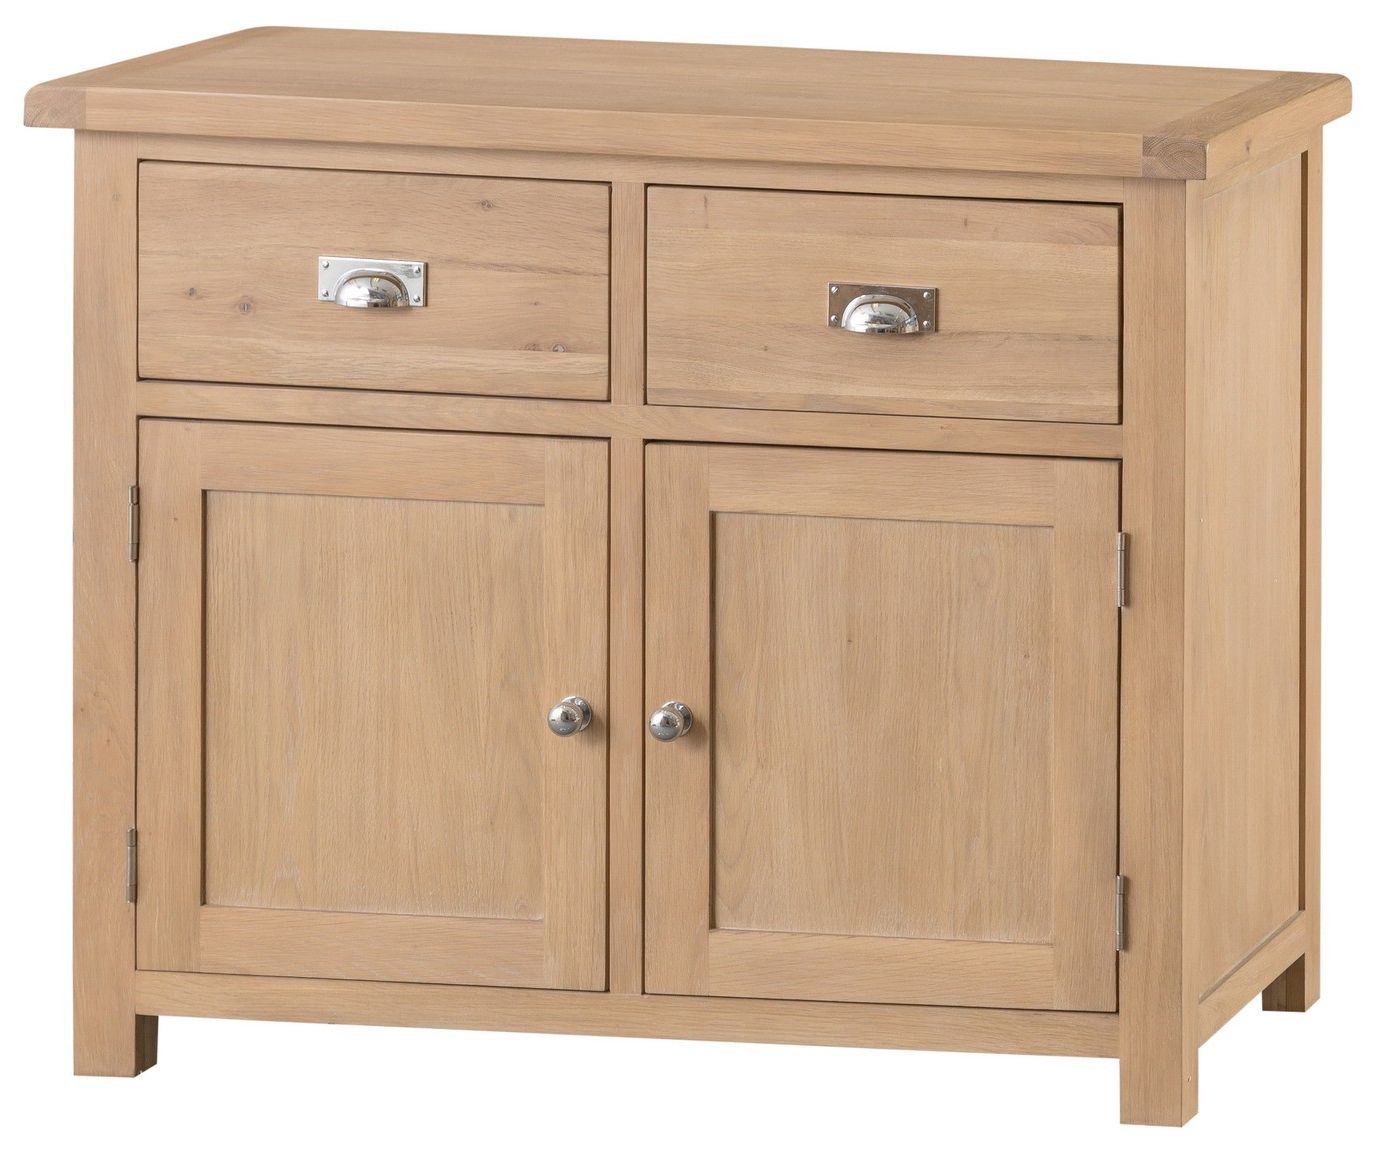 Cardiff Oak Small Sideboard – Sideboards & Tops – Dining Pertaining To Norton Sideboards (View 7 of 20)